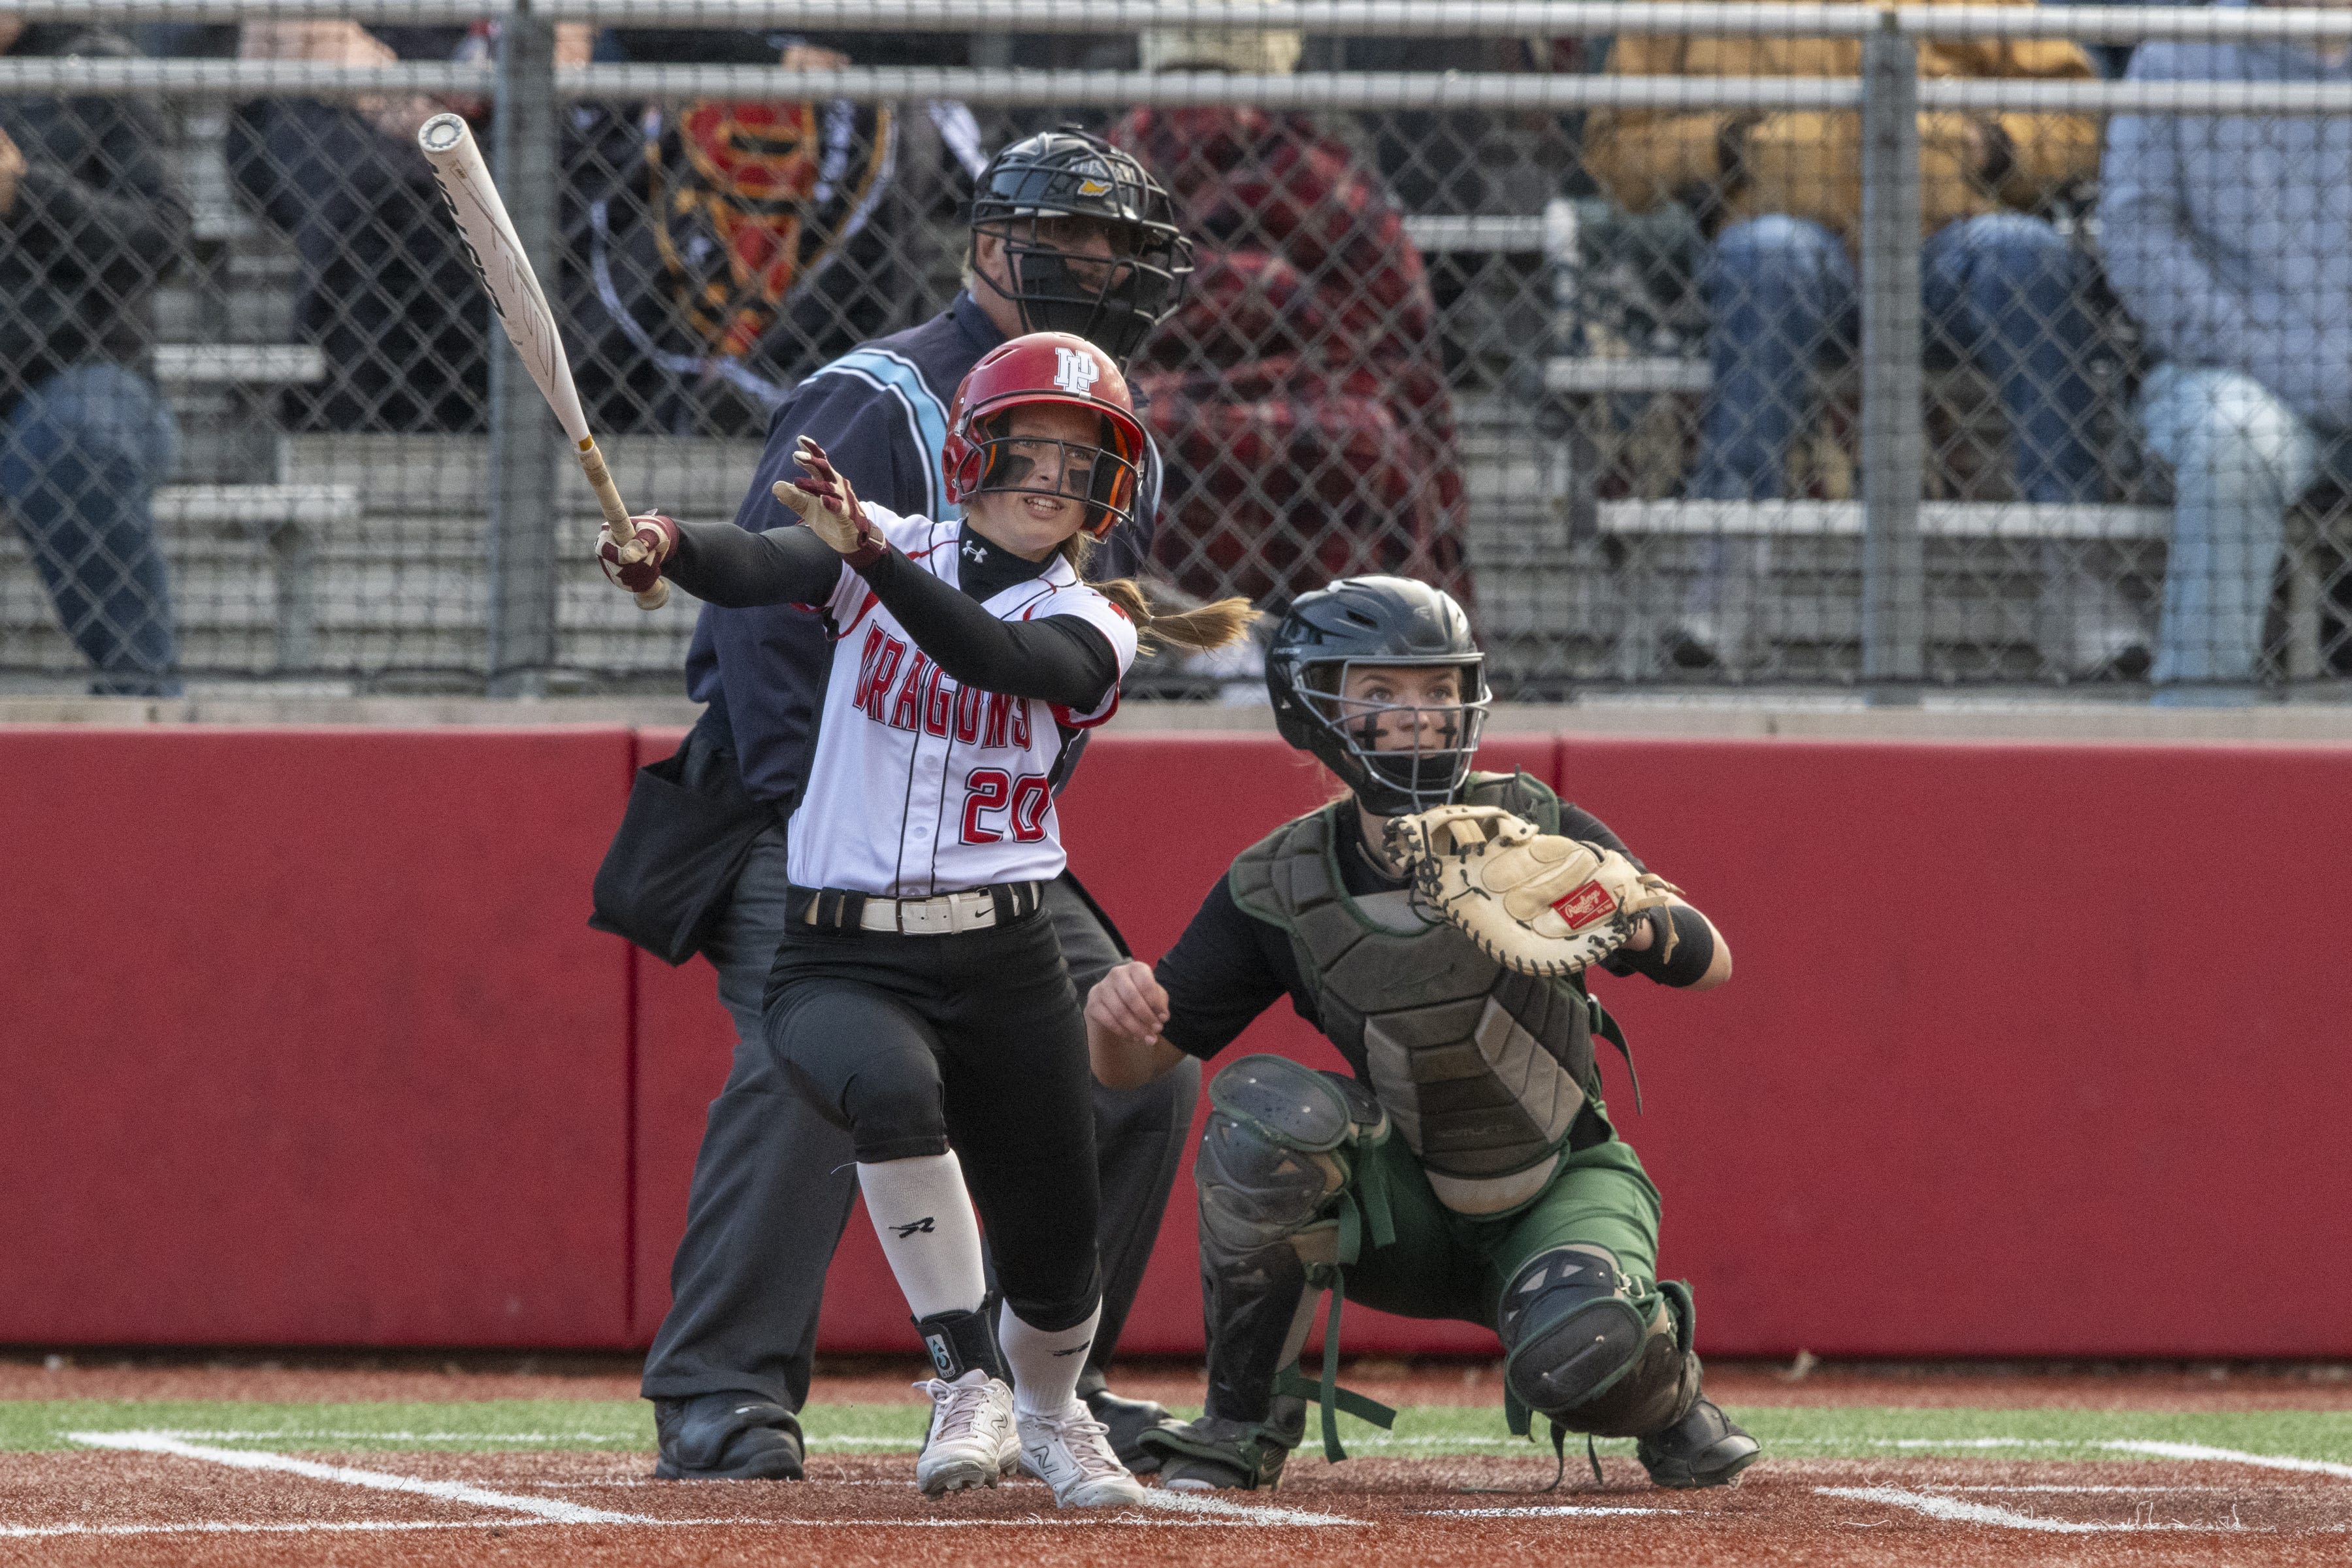 Why New Palestine softball is playing for 4A title: Tournament mindset, senior leadership